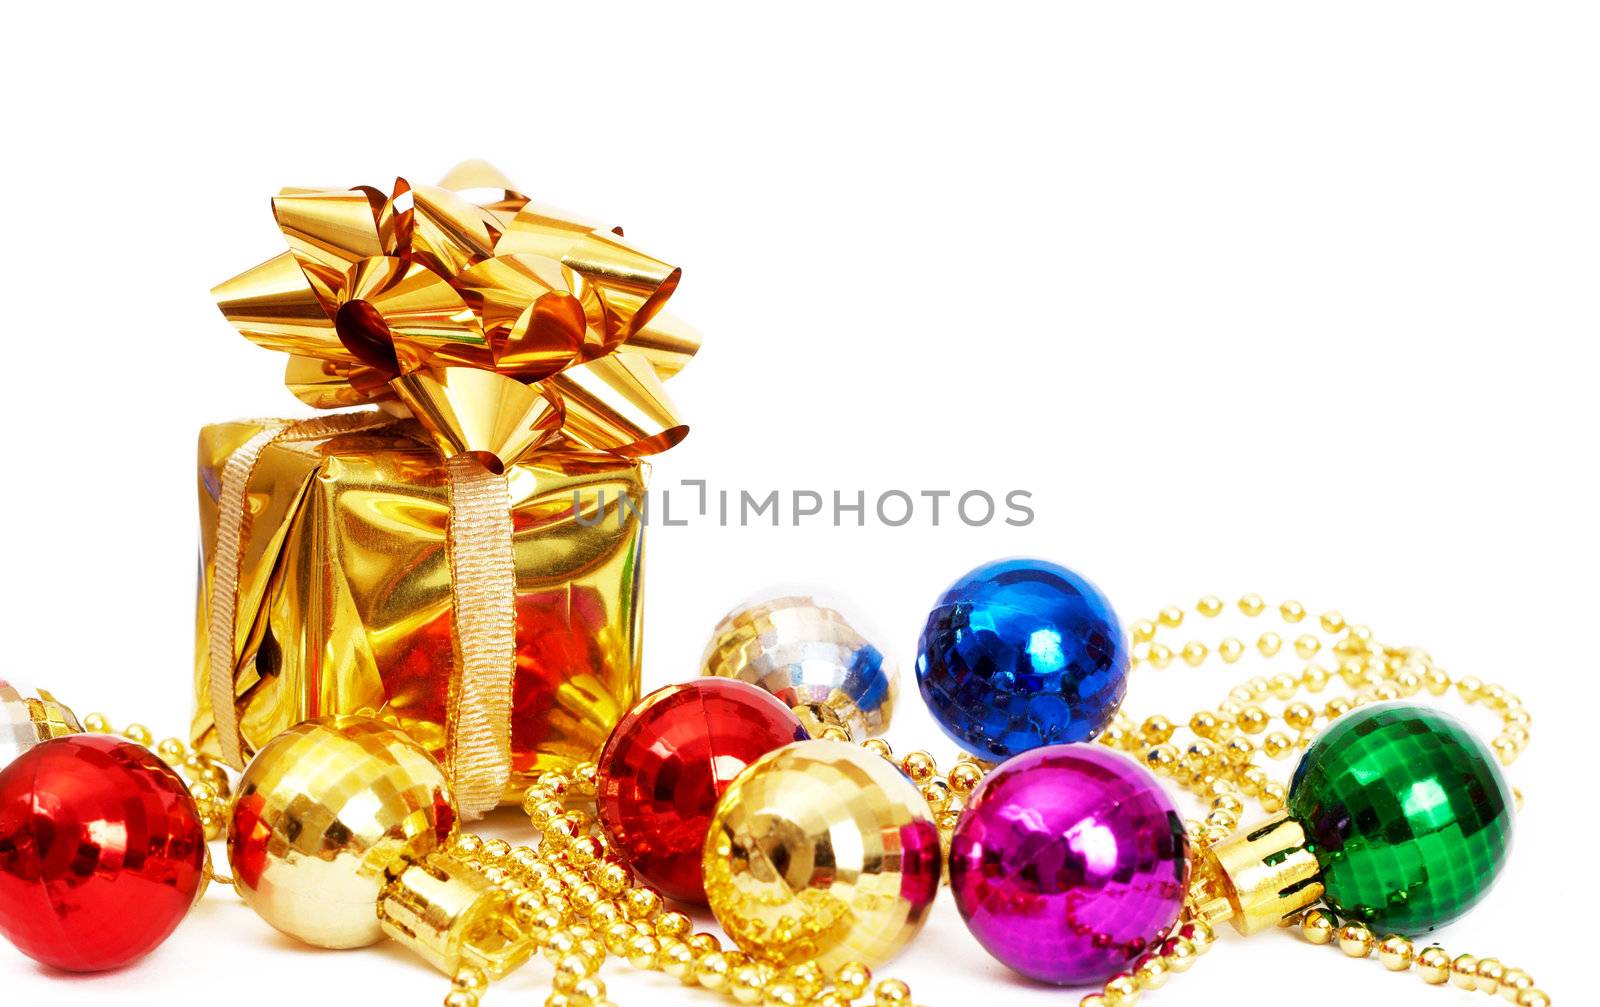 Small gift box and colorful baubles isolated on white background with copy space